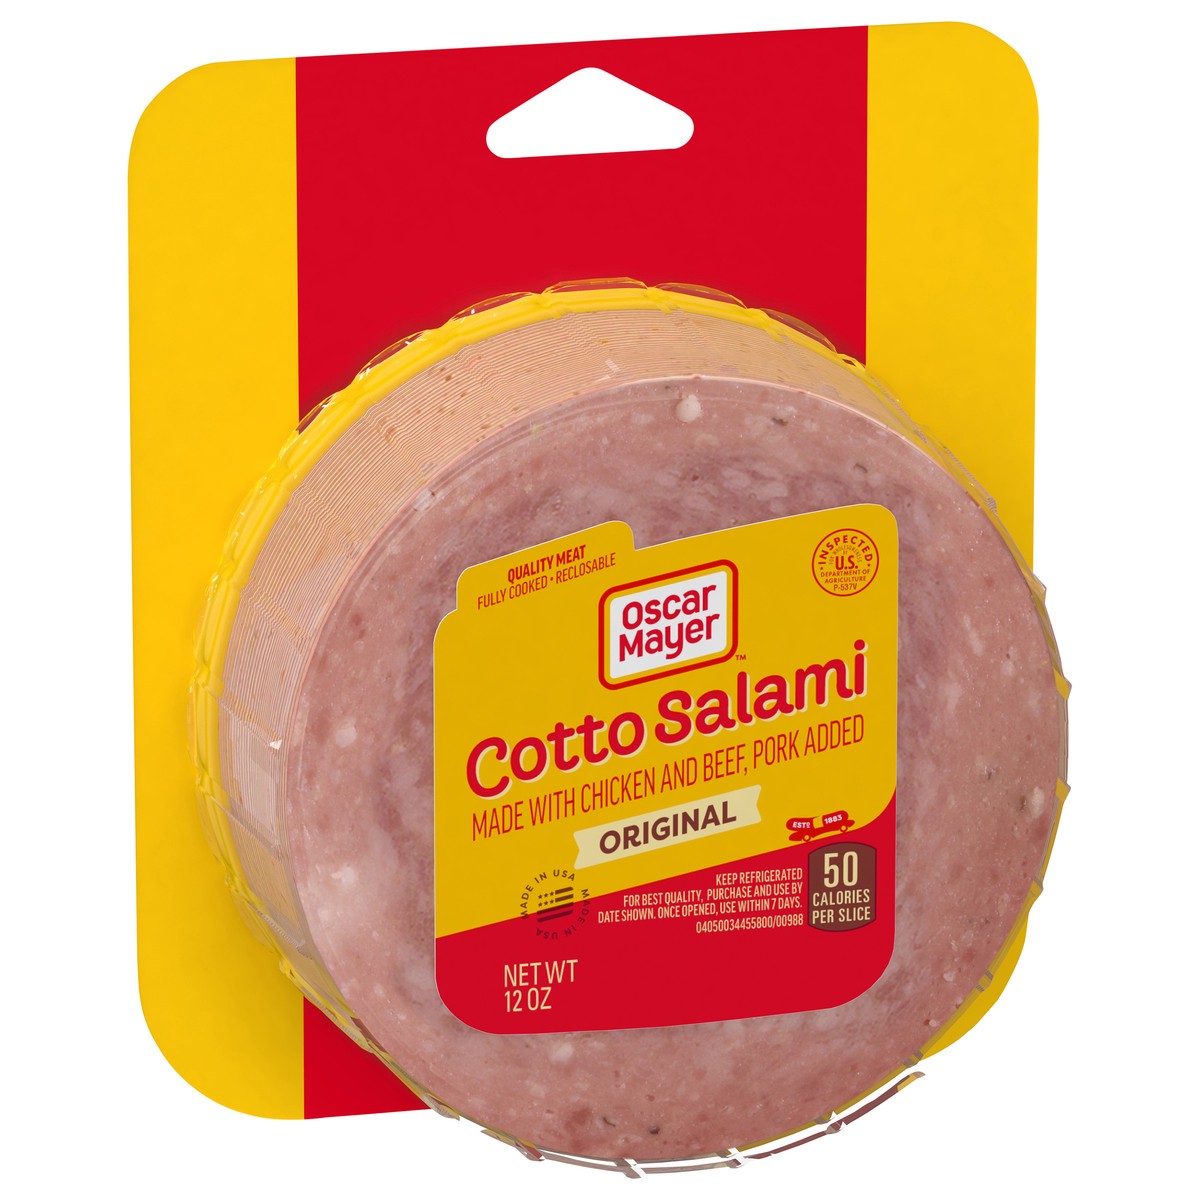 slide 2 of 9, Oscar Mayer Cotto Salami Made with Chicken And Beef, Pork Added Sliced Lunch Meat, 12 oz. Pack, 12 oz